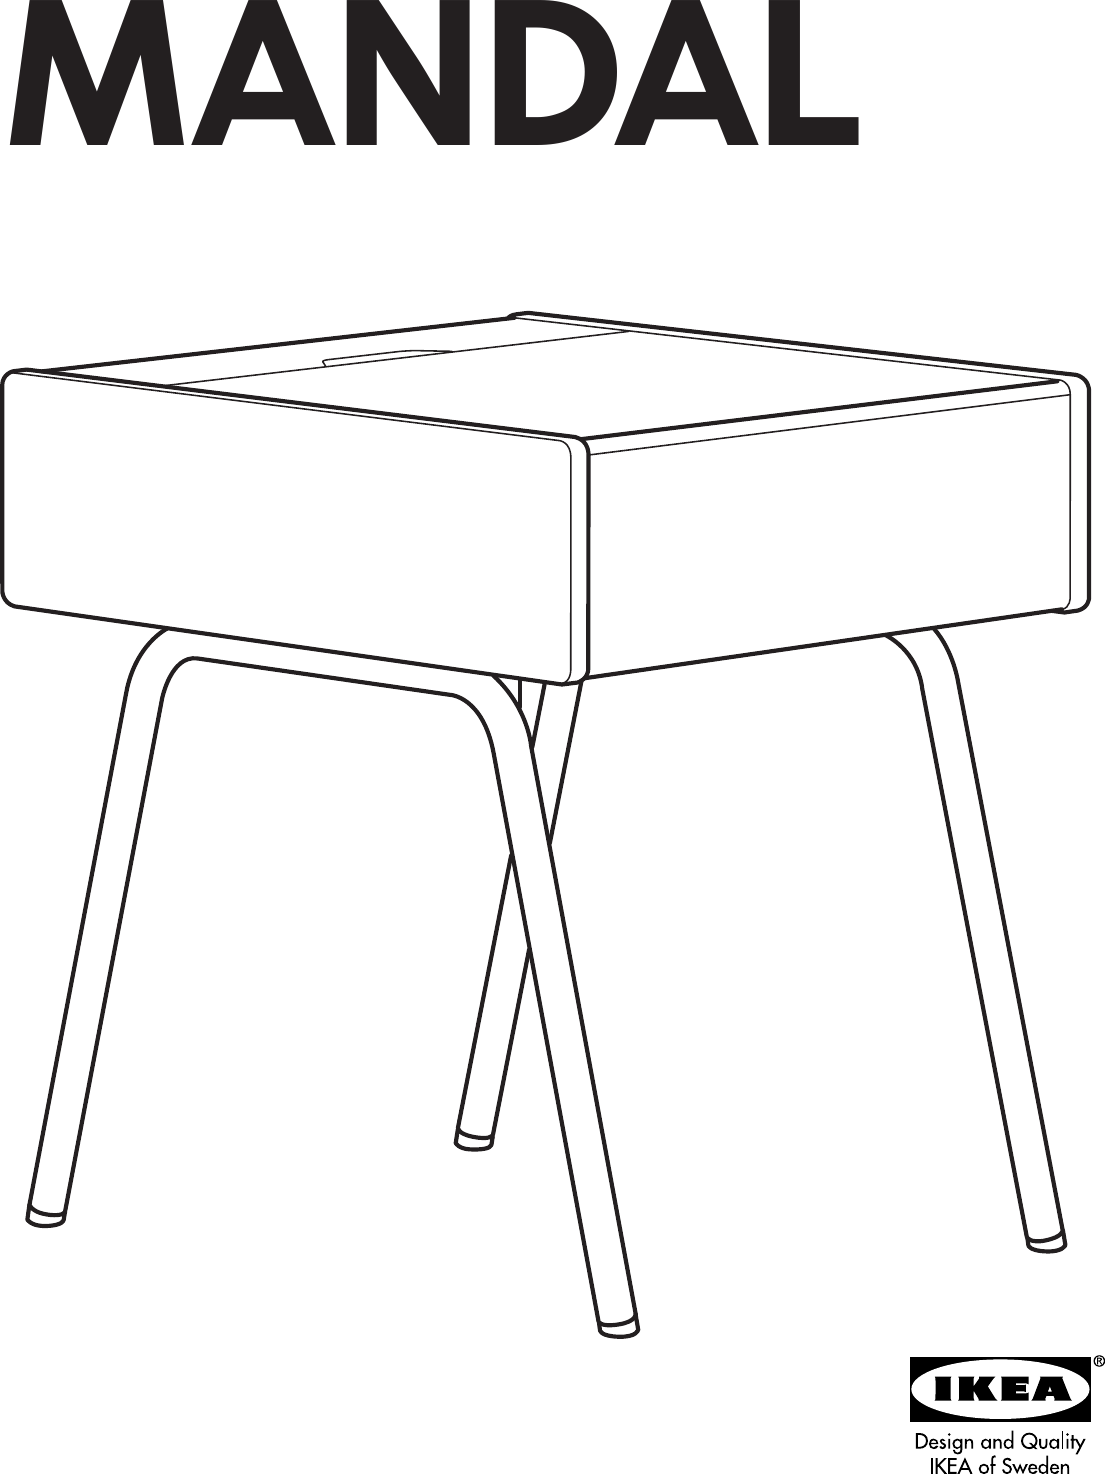 radius sent Plausible Ikea Mandal Bedside Table 18X19 Assembly Instruction